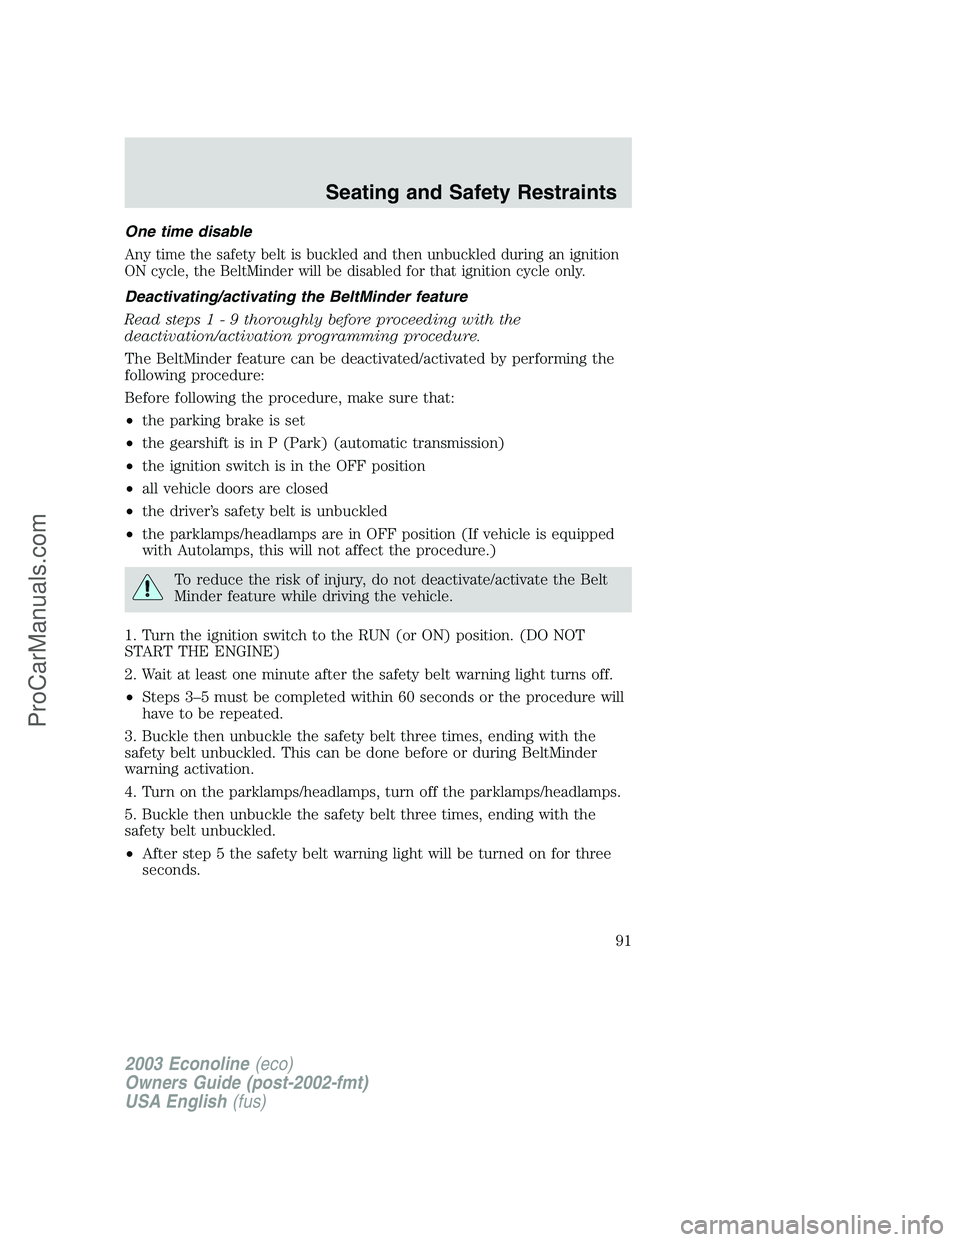 FORD E-150 2003  Owners Manual One time disable
Any time the safety belt is buckled and then unbuckled during an ignition
ON cycle, the BeltMinder will be disabled for that ignition cycle only.
Deactivating/activating the BeltMinde